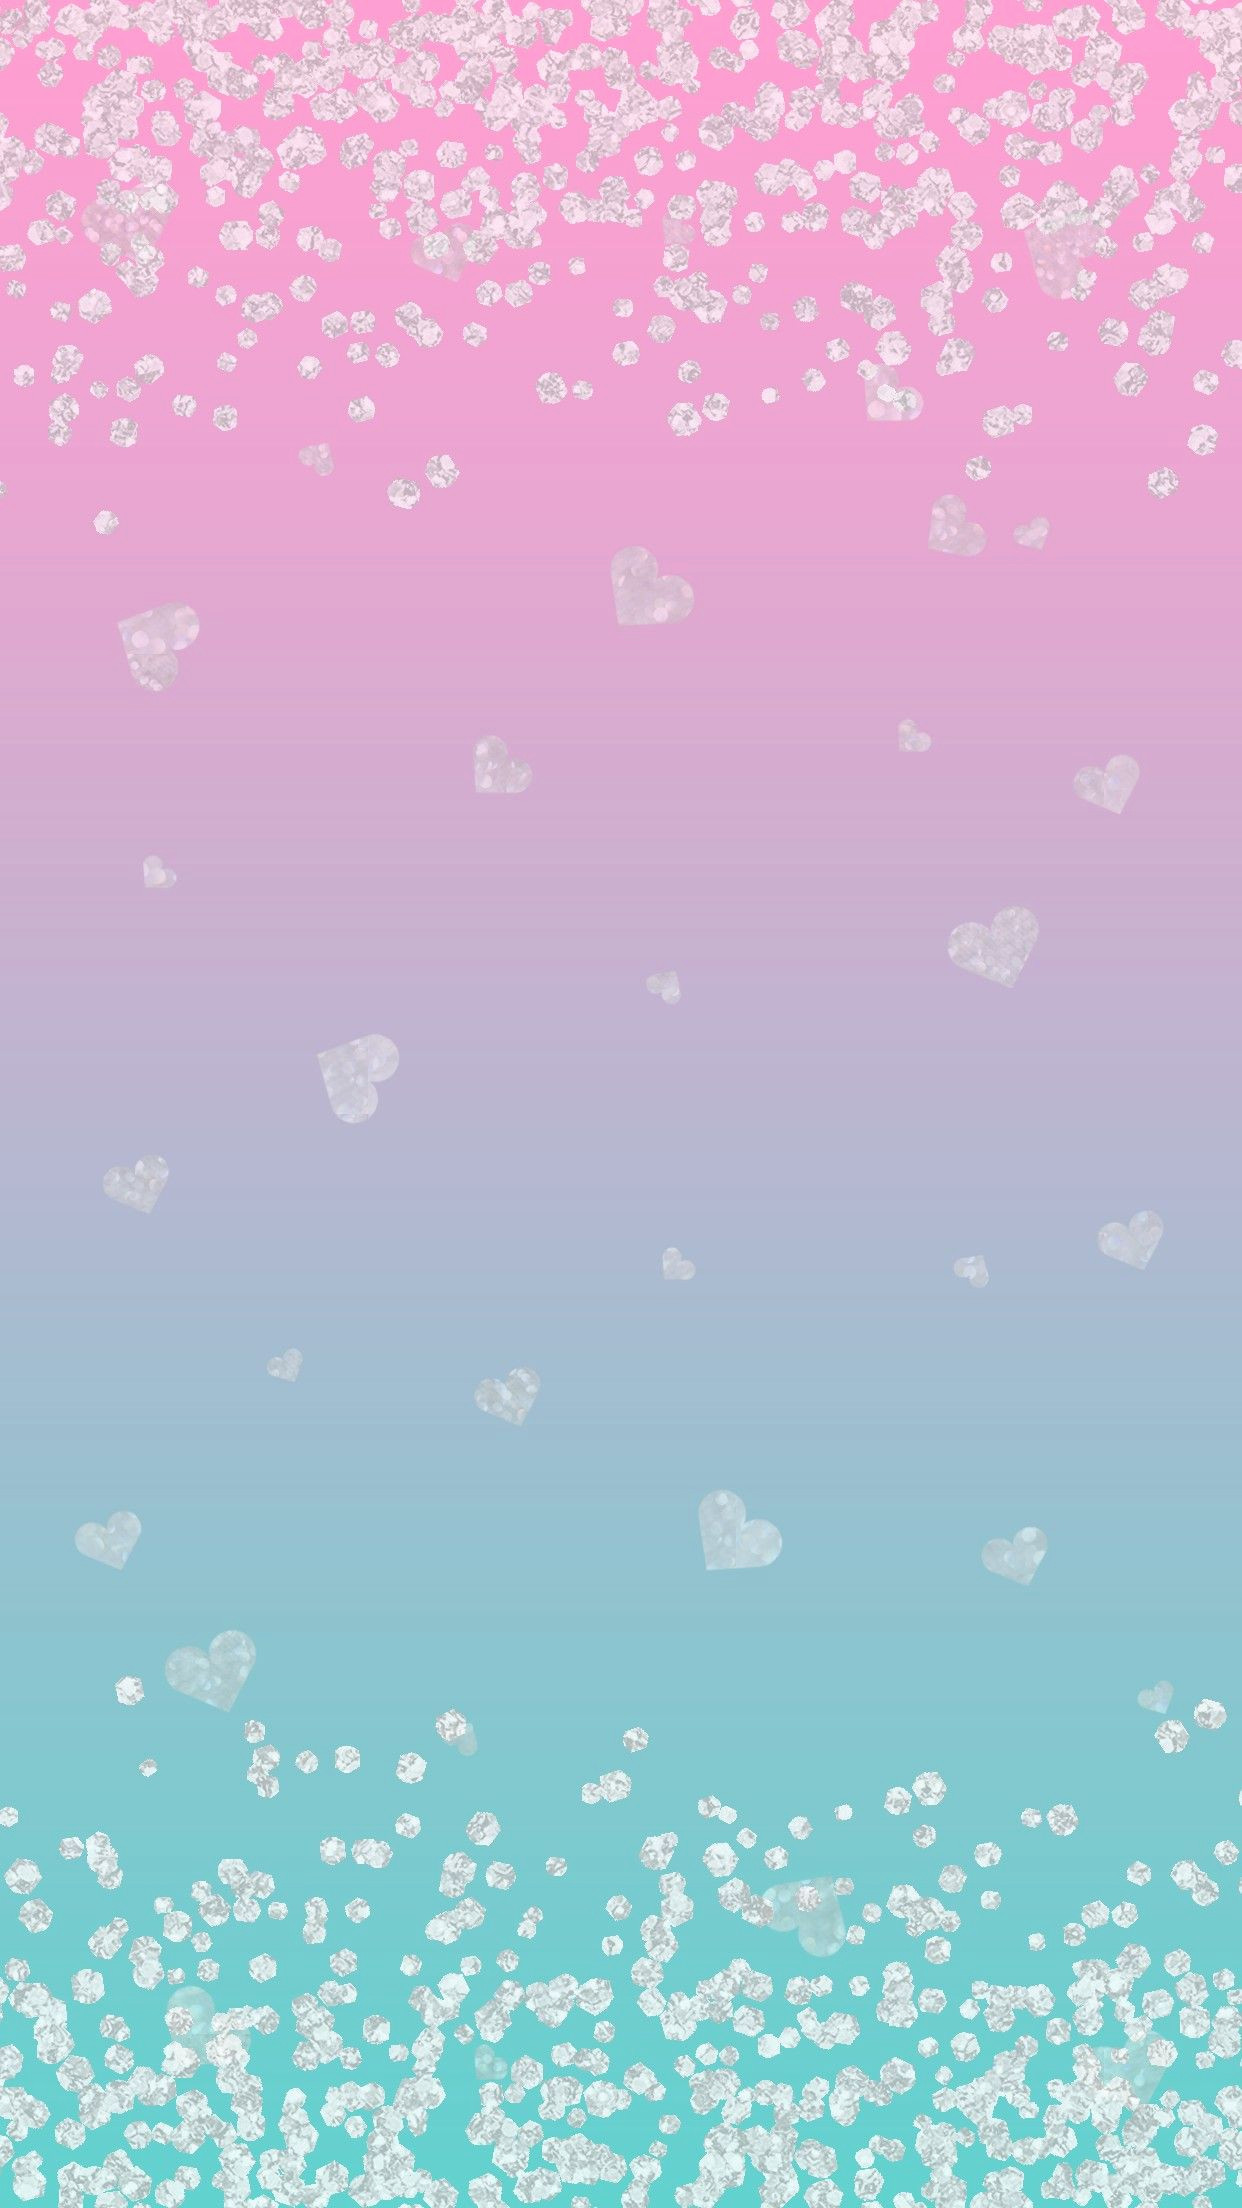 Cute Pink Wallpaper For iPhone Image